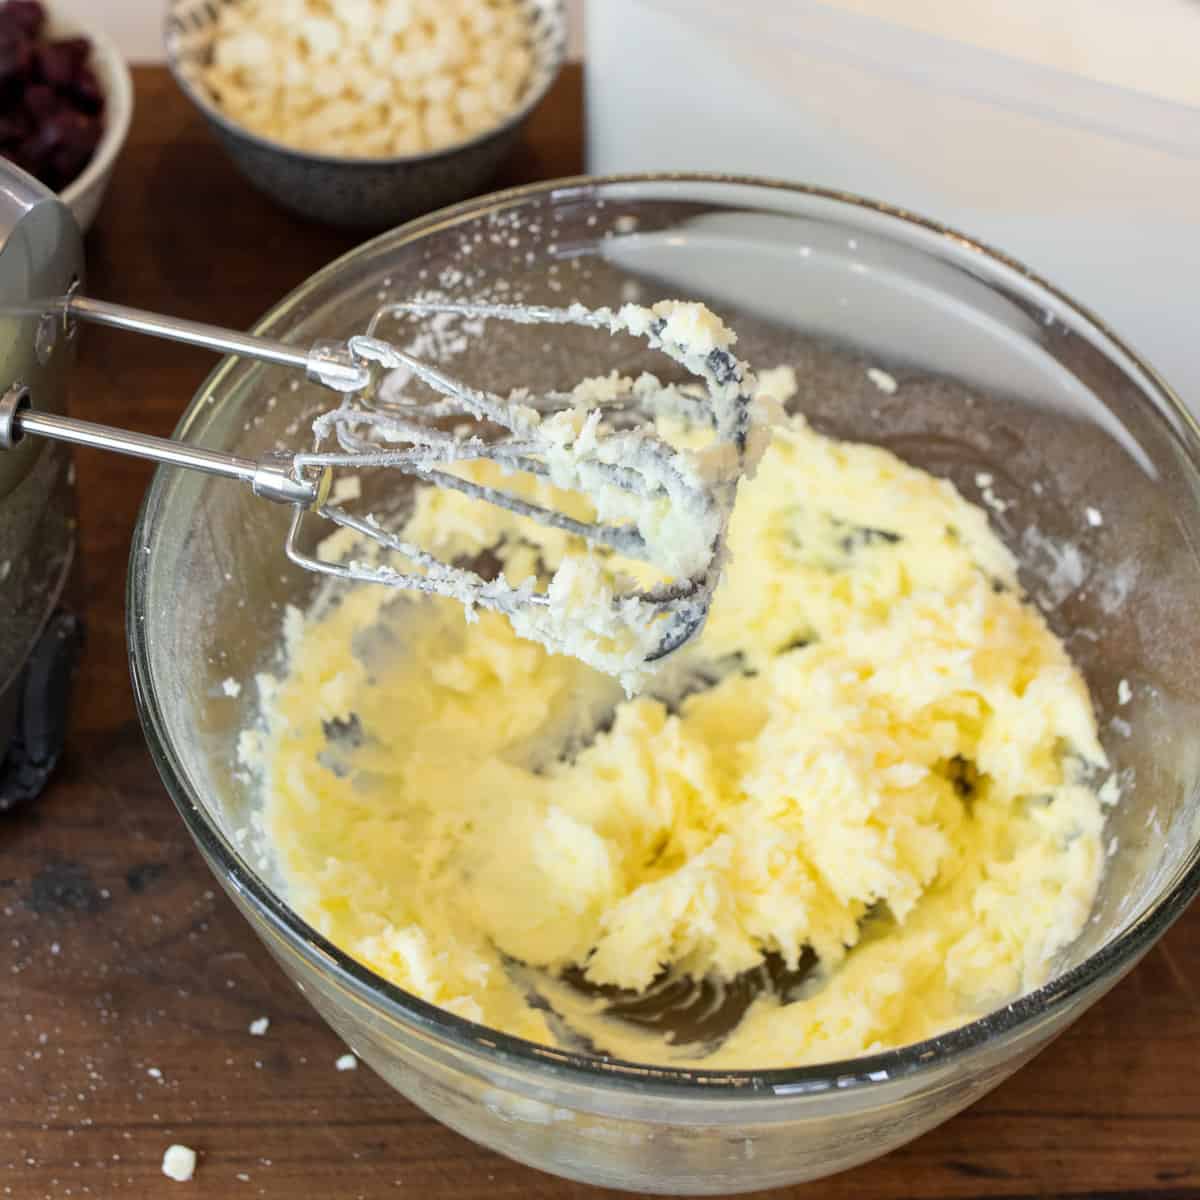 Butter and sugar mixed together in a glass mixing bowl.